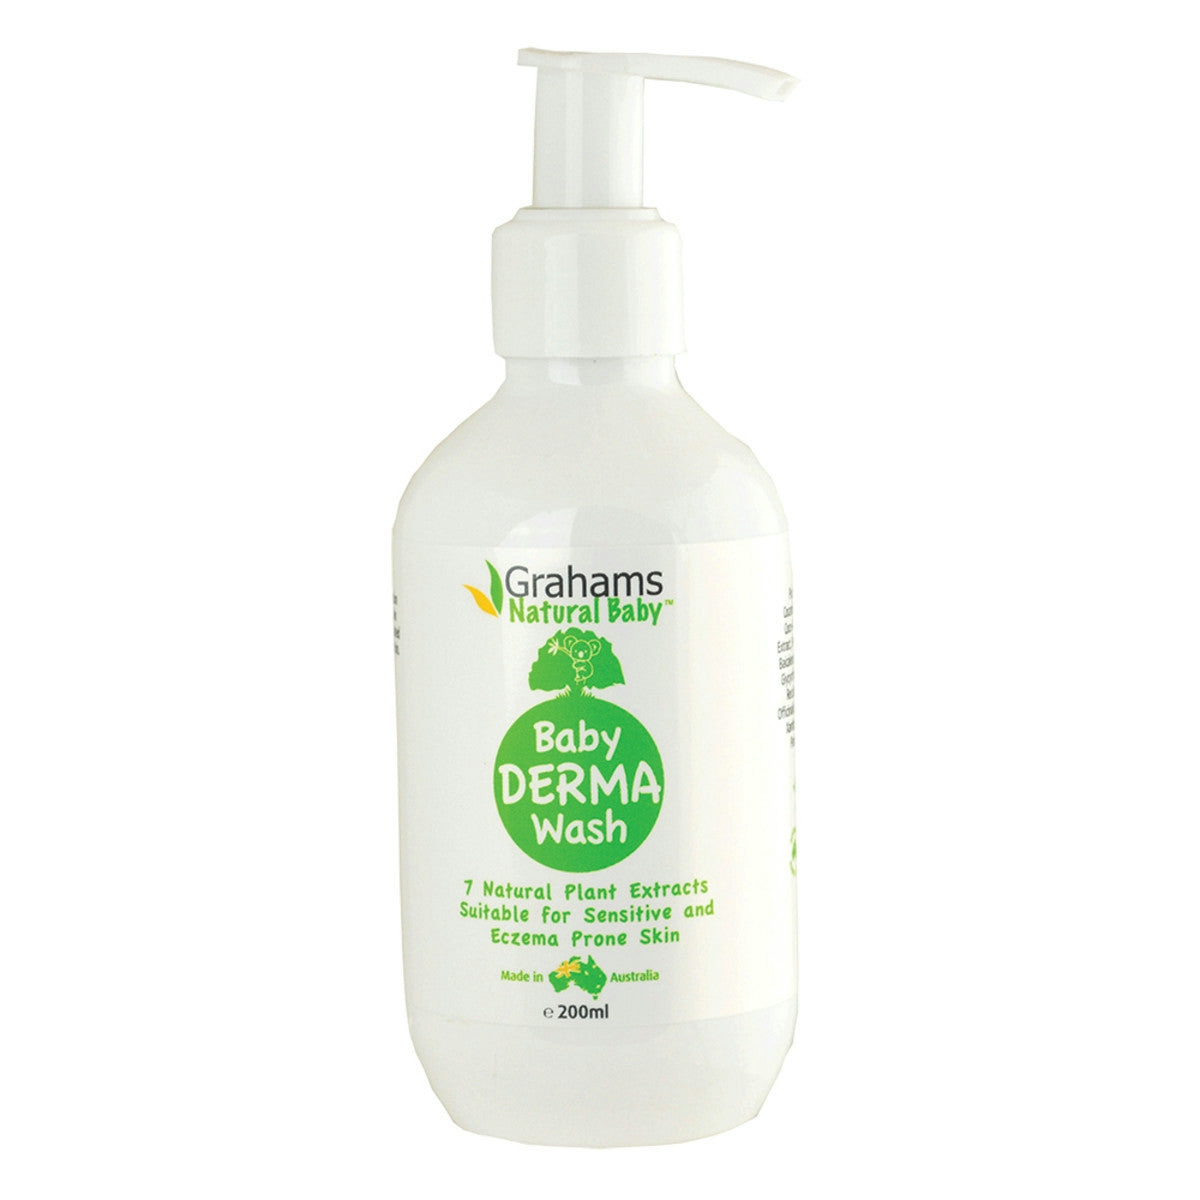 image of Grahams Natural Baby Derma Wash 200ml on white background 